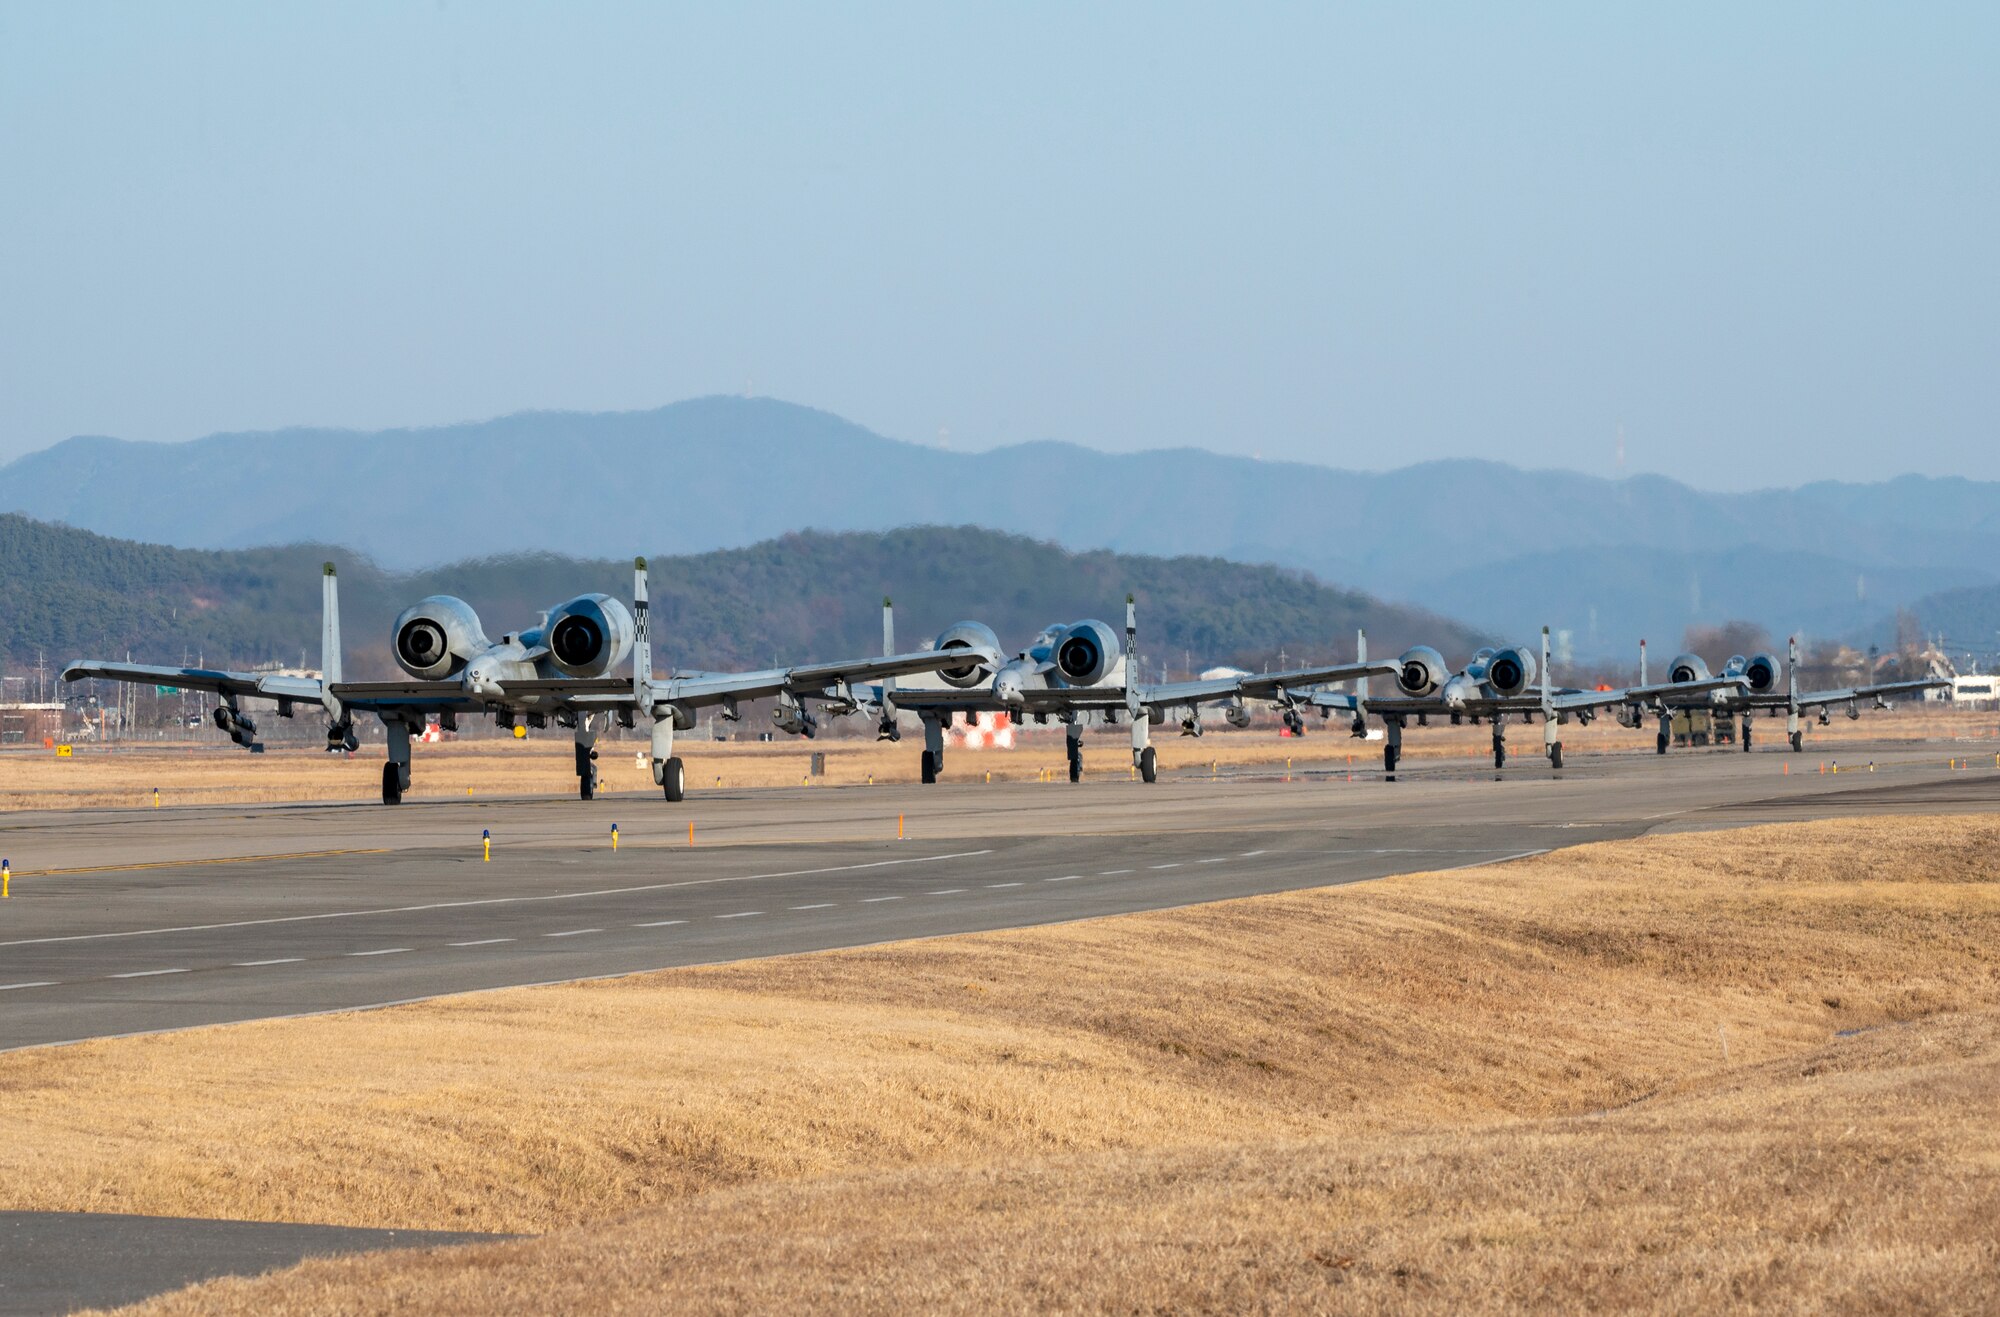 A-10C Thunderbolt IIs, assigned to the 25th Fighter Squadron, taxi down the runway at Osan Air Base, Republic of Korea, Jan. 30, 2023. The aircraft took off as part of a week-long training event testing Osan’s ability to execute operations under realistic threat conditions. (U.S. Air Force Photo by Airman 1st Class Aaron Edwards)